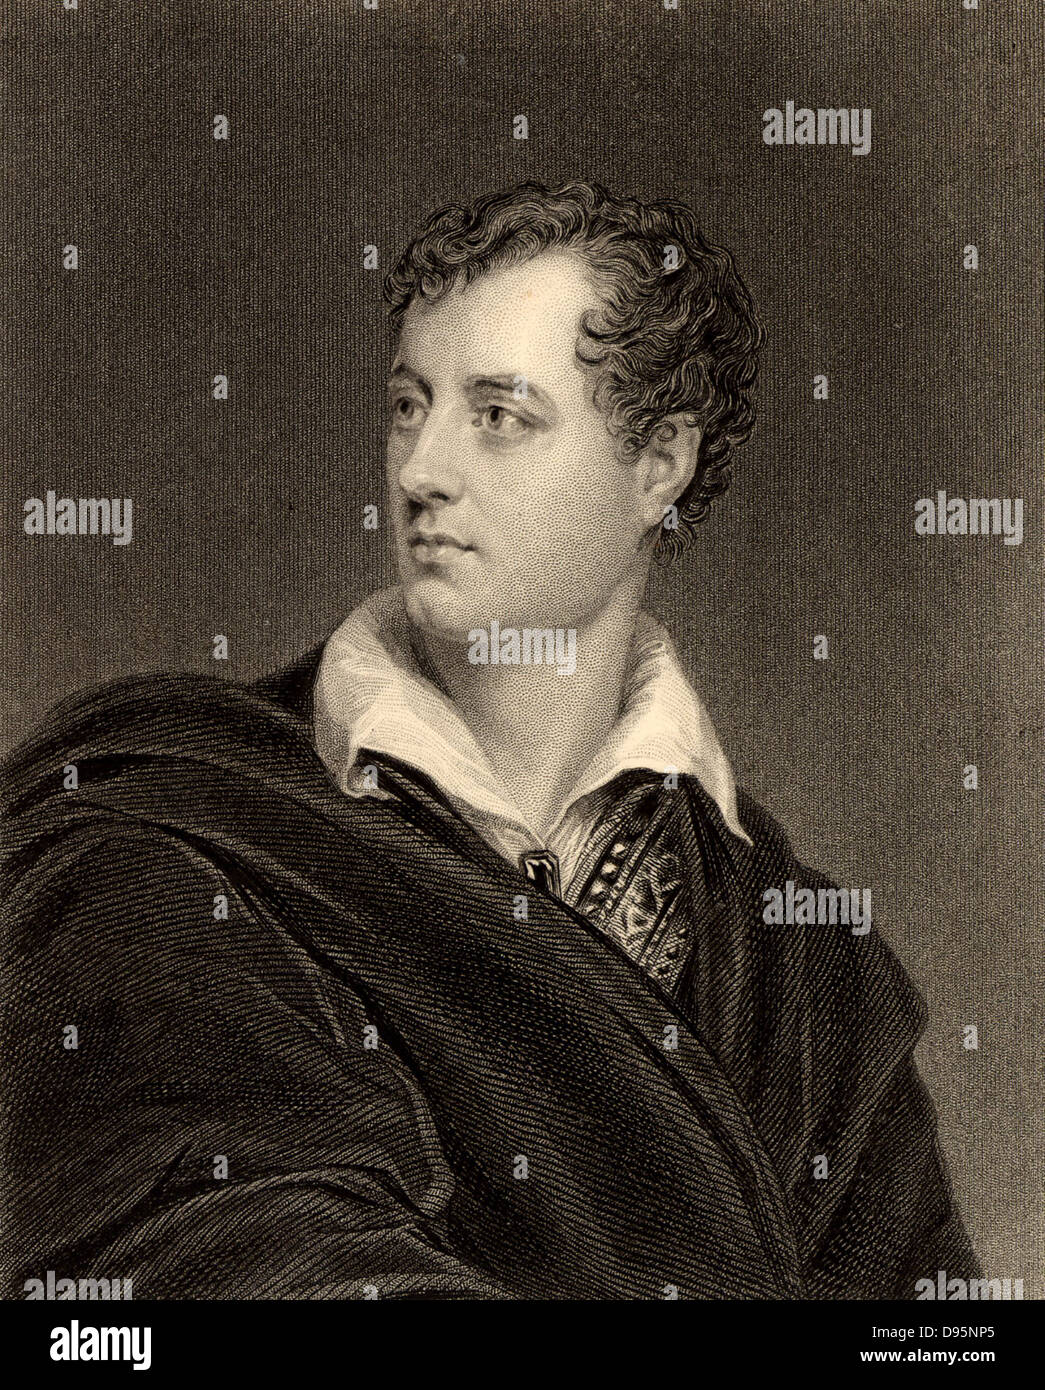 George Gordon, Lord Byron (1788-1824) English Romantic poet of Scottish descent.  Engraving  from 'The World's Great Men' (London, c1870). Stock Photo